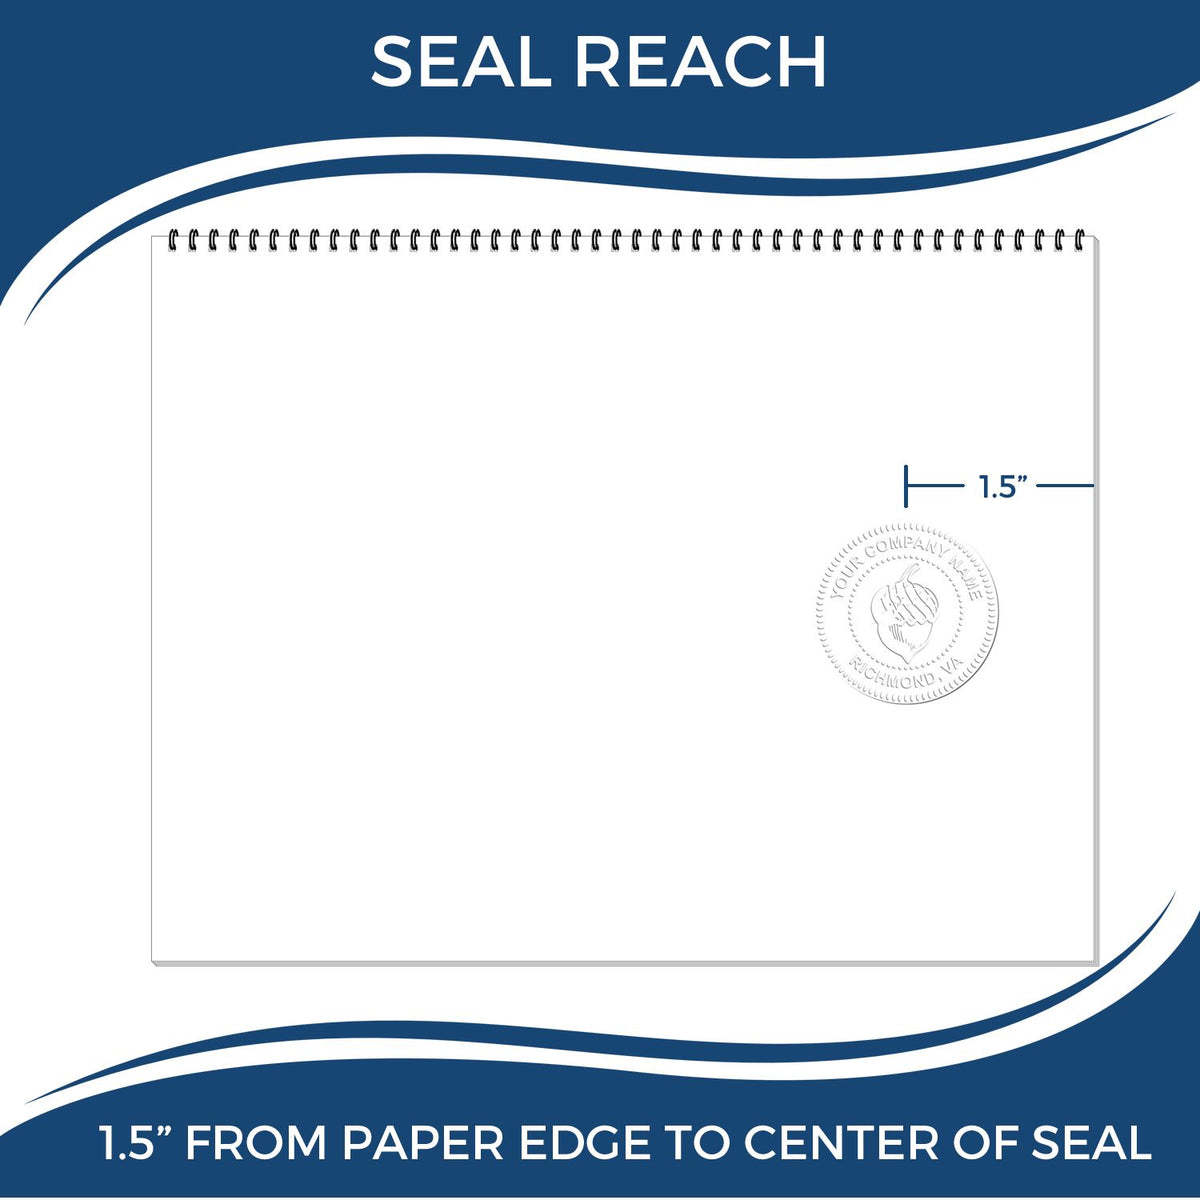 An infographic showing the seal reach which is represented by a ruler and a miniature seal image of the Gift Pennsylvania Land Surveyor Seal